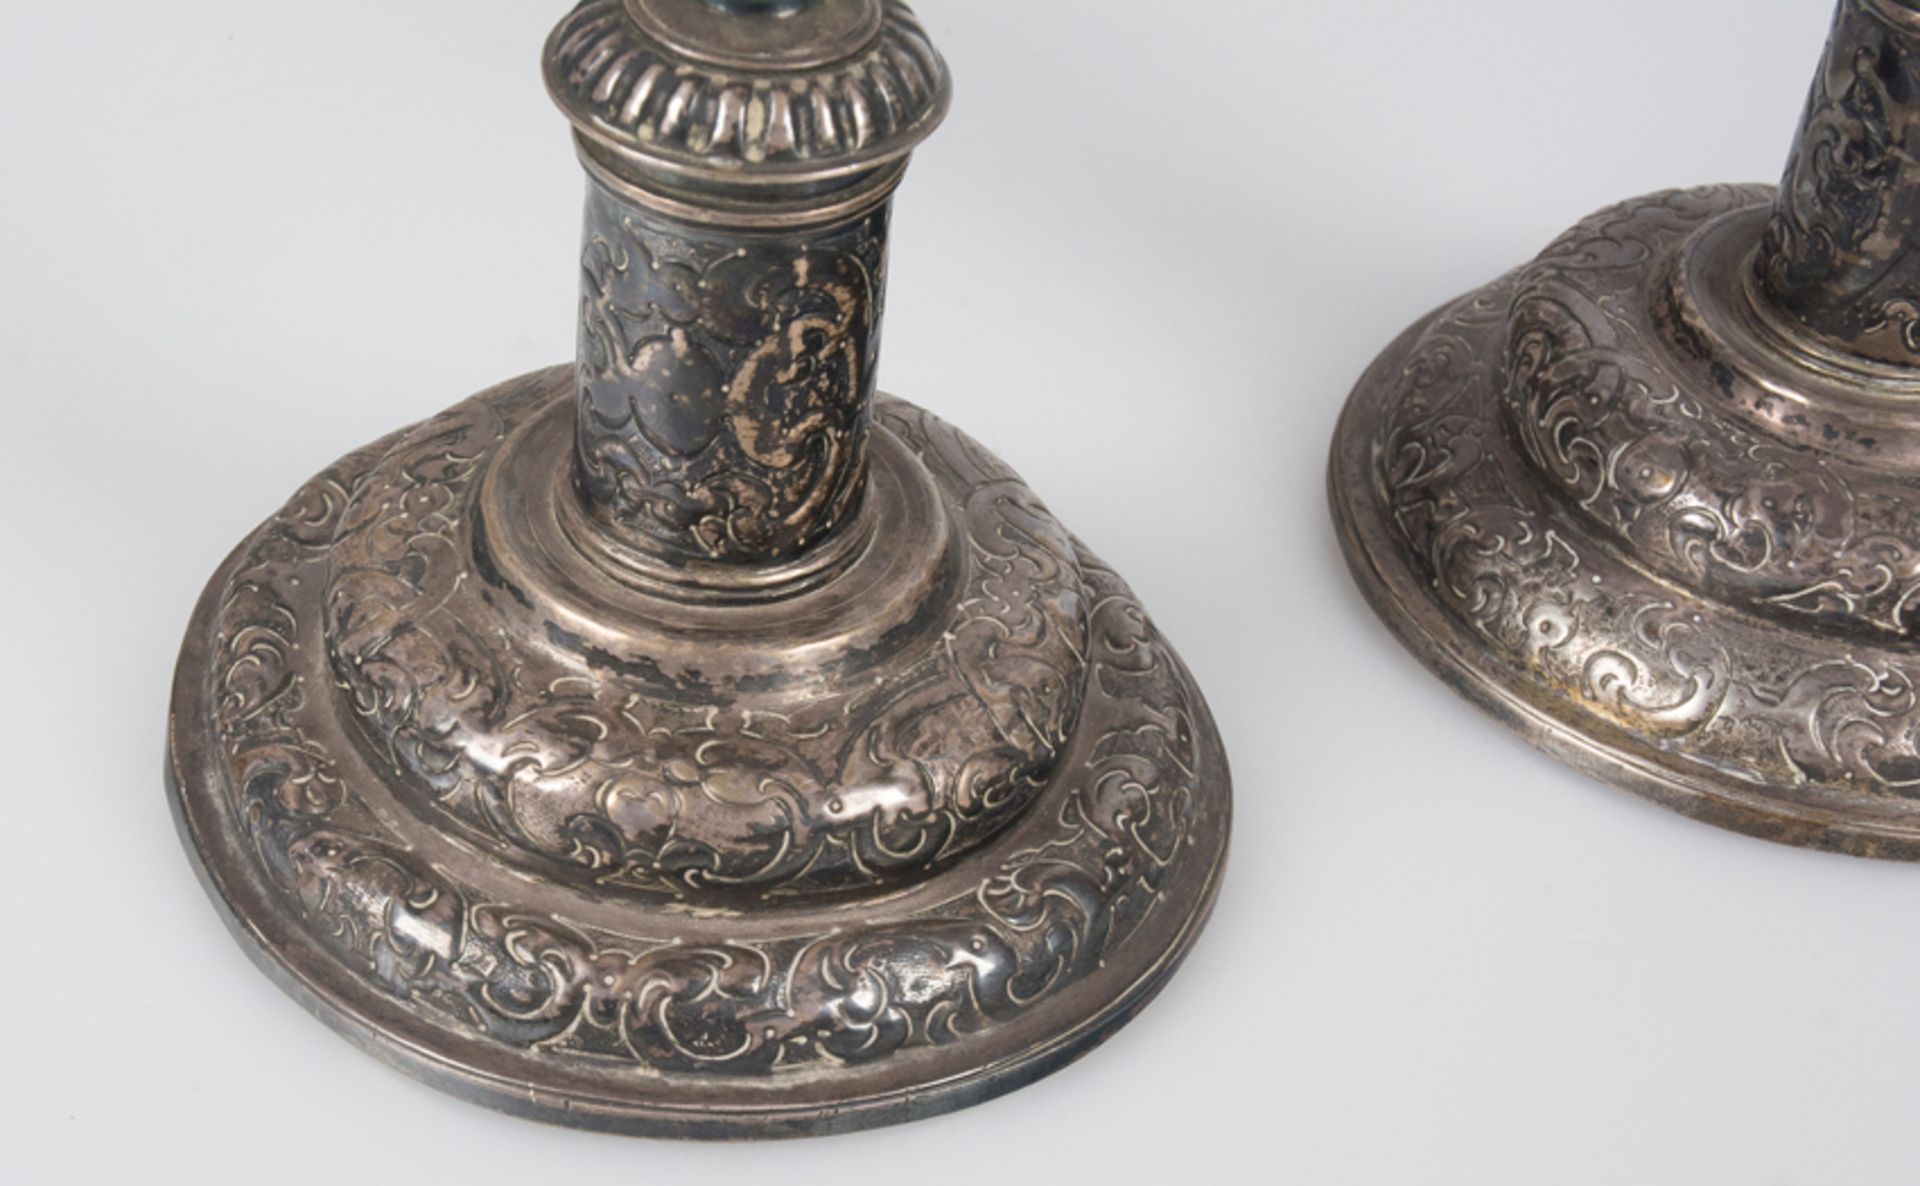 Pair of embossed and chased Spanish silver candlesticks. 16th 17th century. - Image 6 of 8